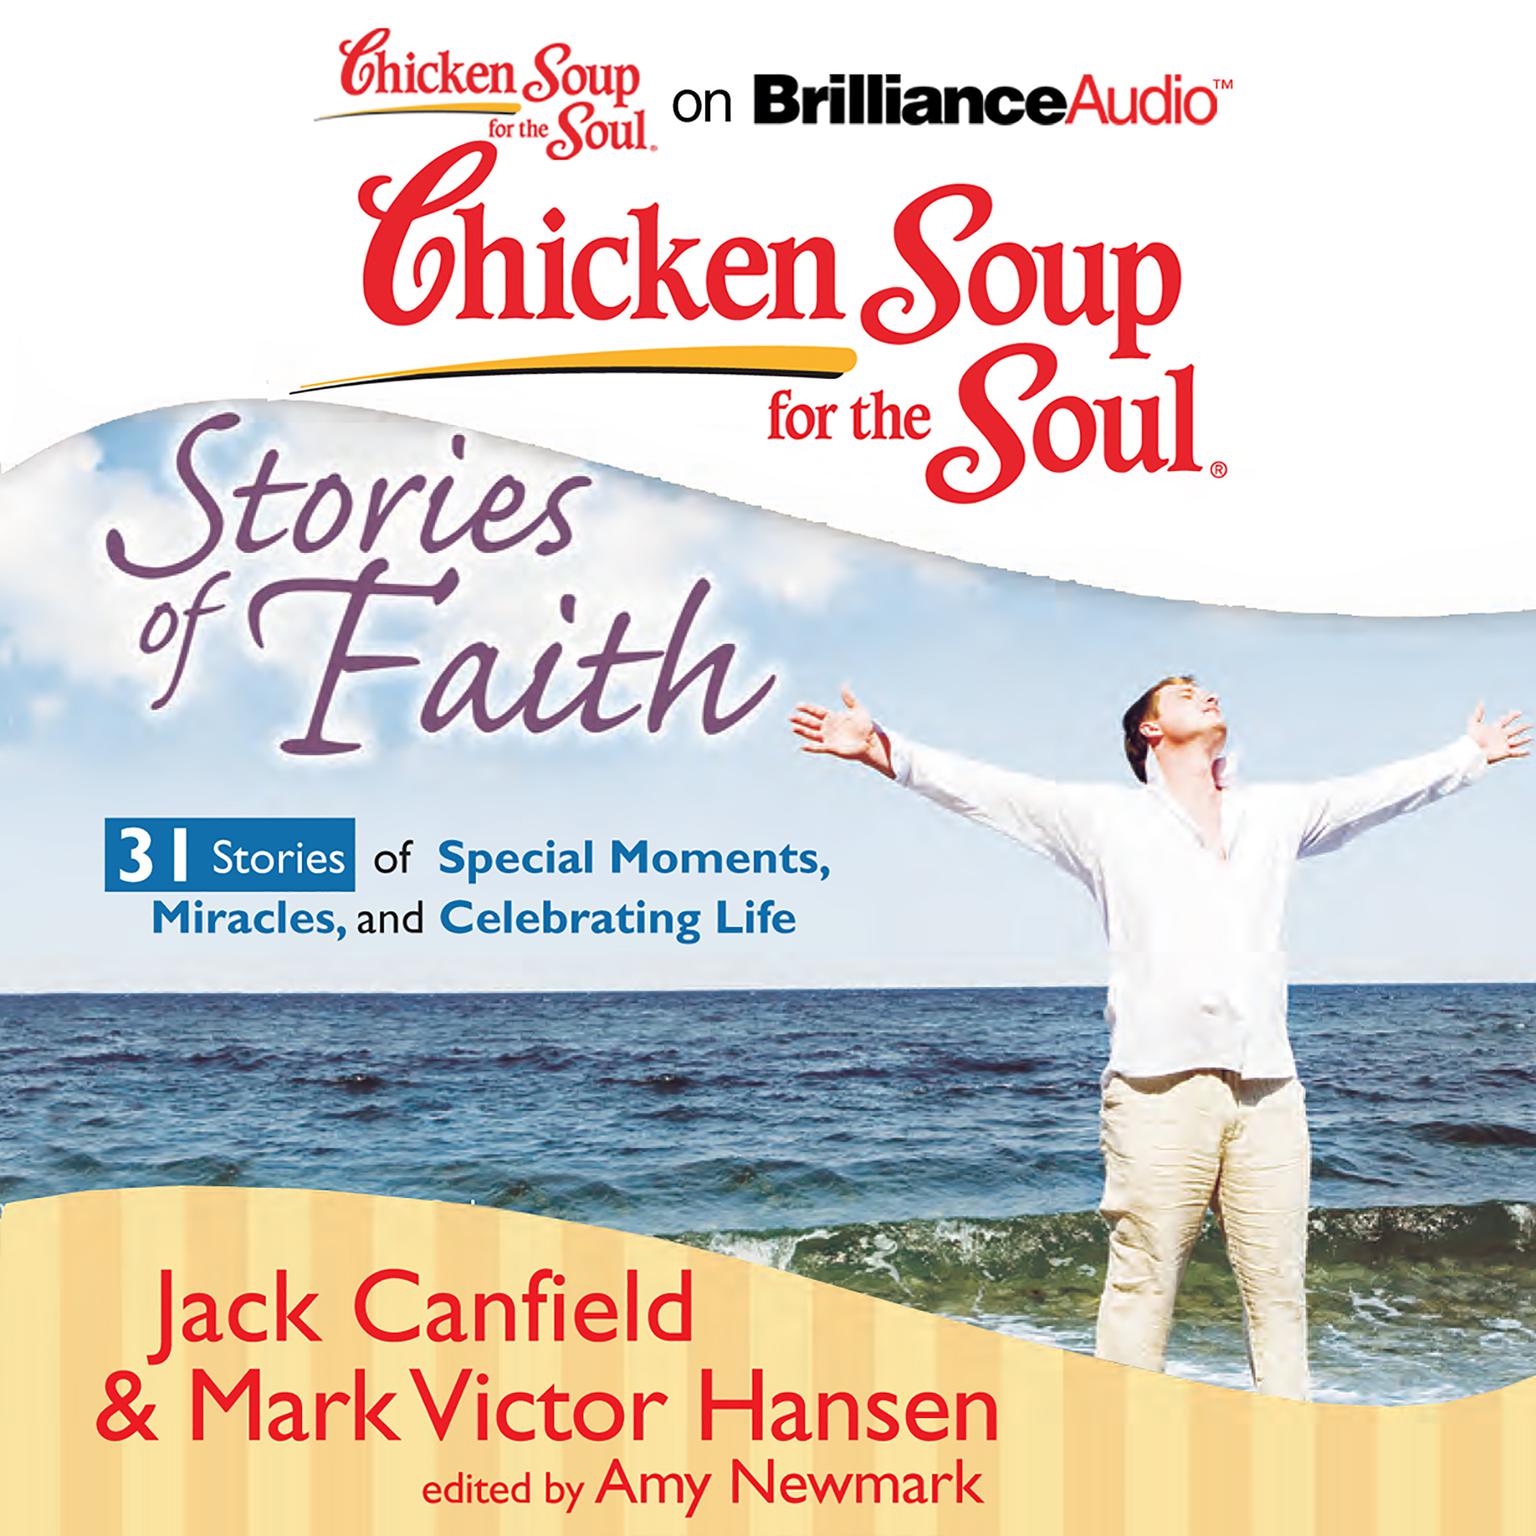 Chicken Soup for the Soul: Stories of Faith - 31 Stories of Special Moments, Miracles, and Celebrating Life Audiobook, by Jack Canfield